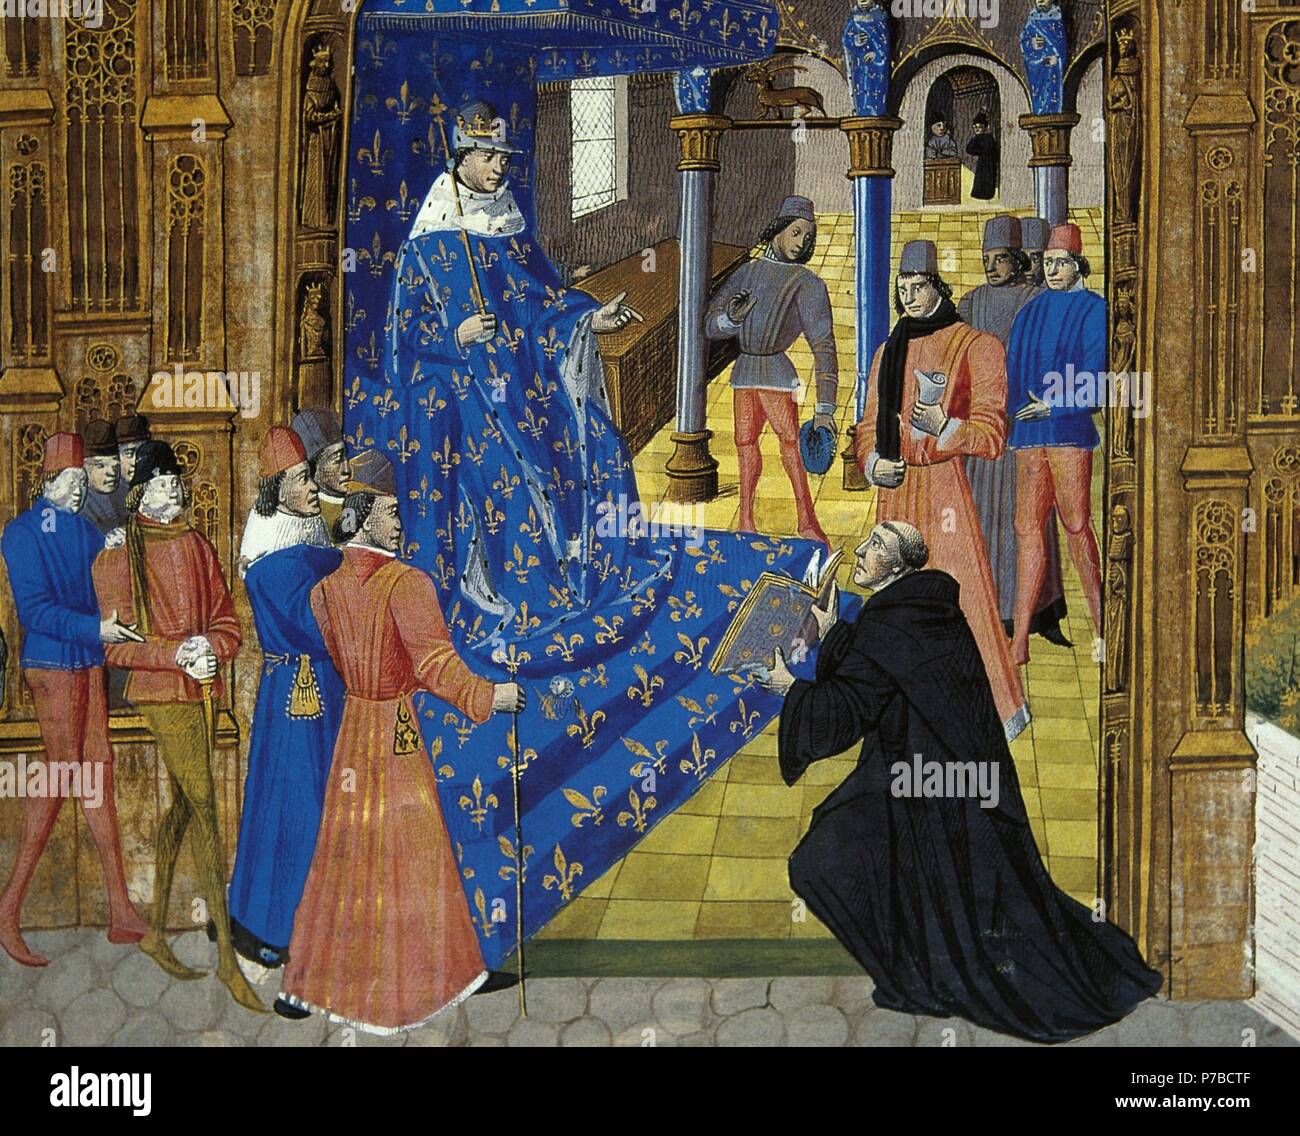 John II of France (1319-1364). King of France. Miniature depicting King John II receiving the translation of Livy of Pierre Bersuire (h. 1290-1362). Chantilly Castle. France. Stock Photo